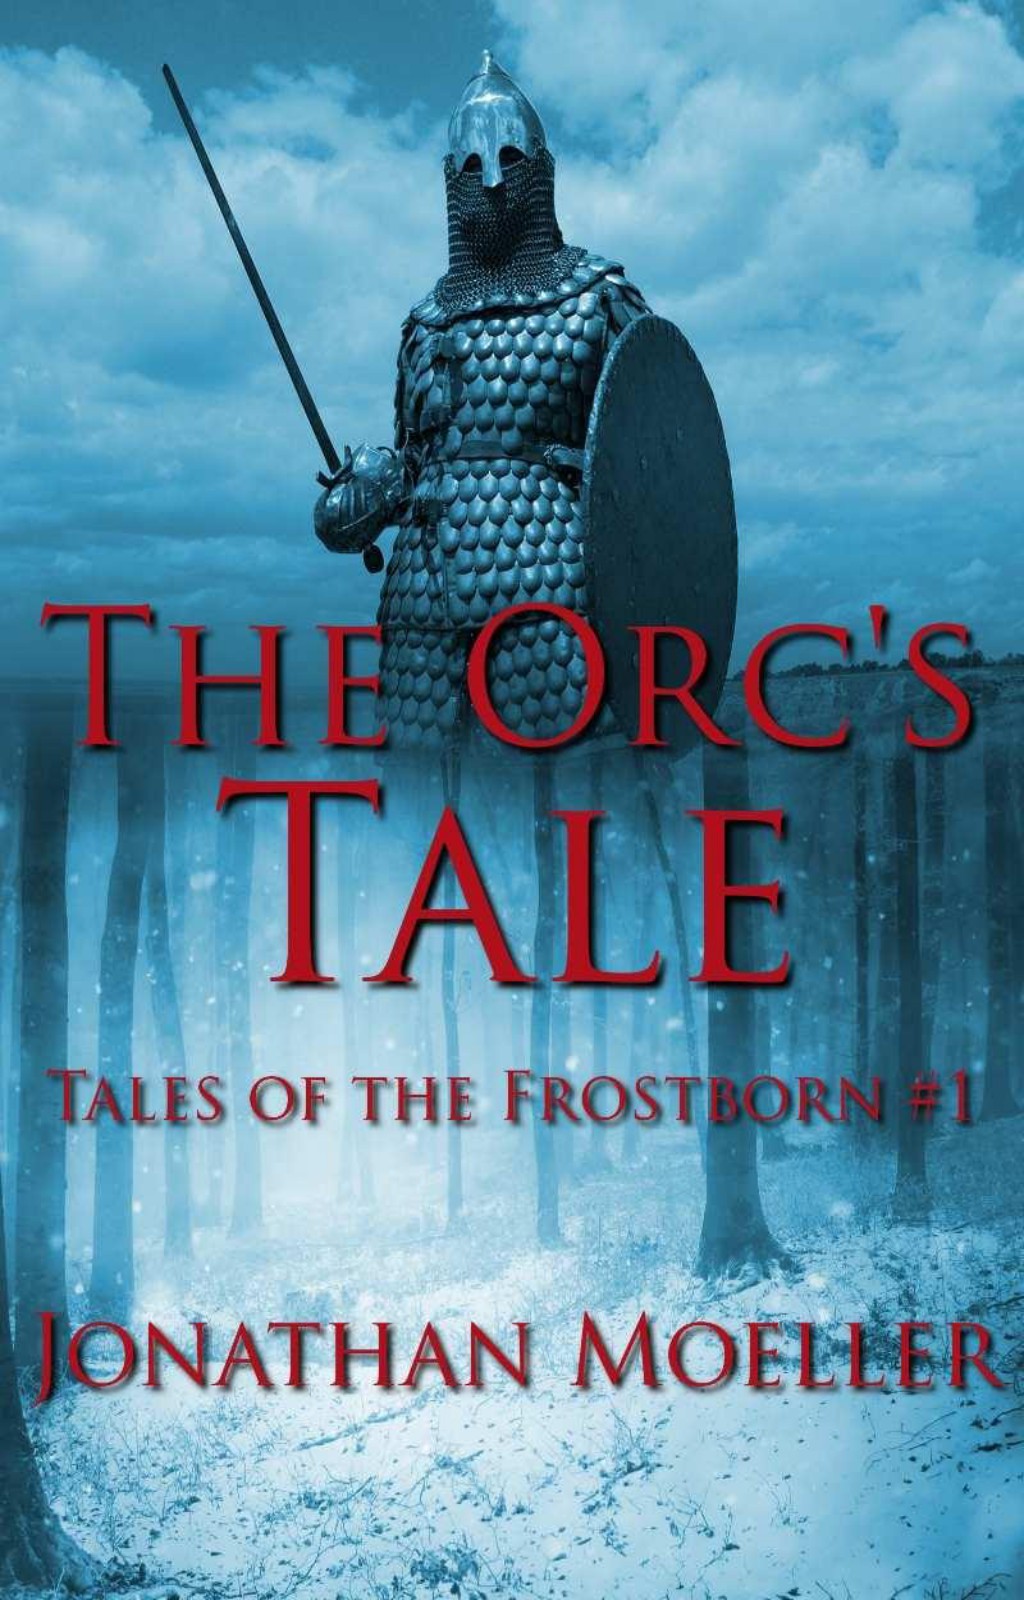 The Orc's Tale by Jonathan Moeller